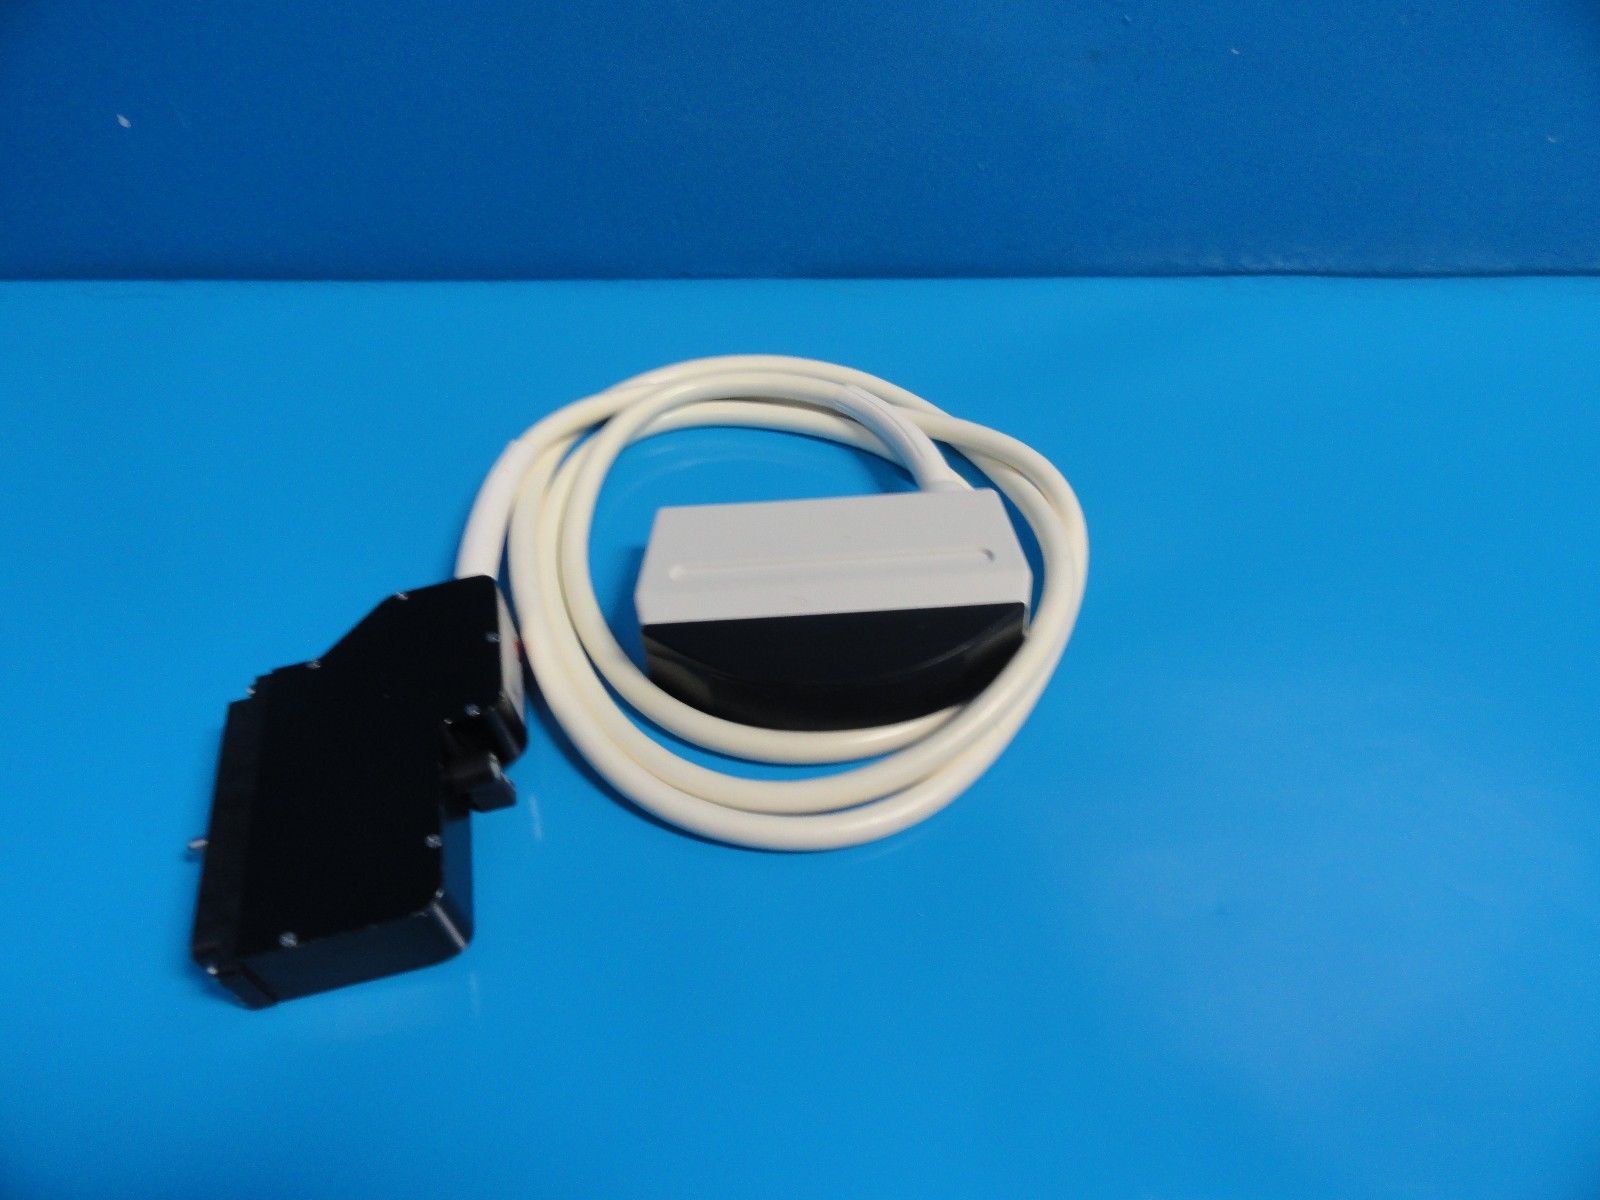 GE Diasonics 3.5 MHz P/N 100-01984-00 Slightly Curved Linear Array Probe (10216) DIAGNOSTIC ULTRASOUND MACHINES FOR SALE